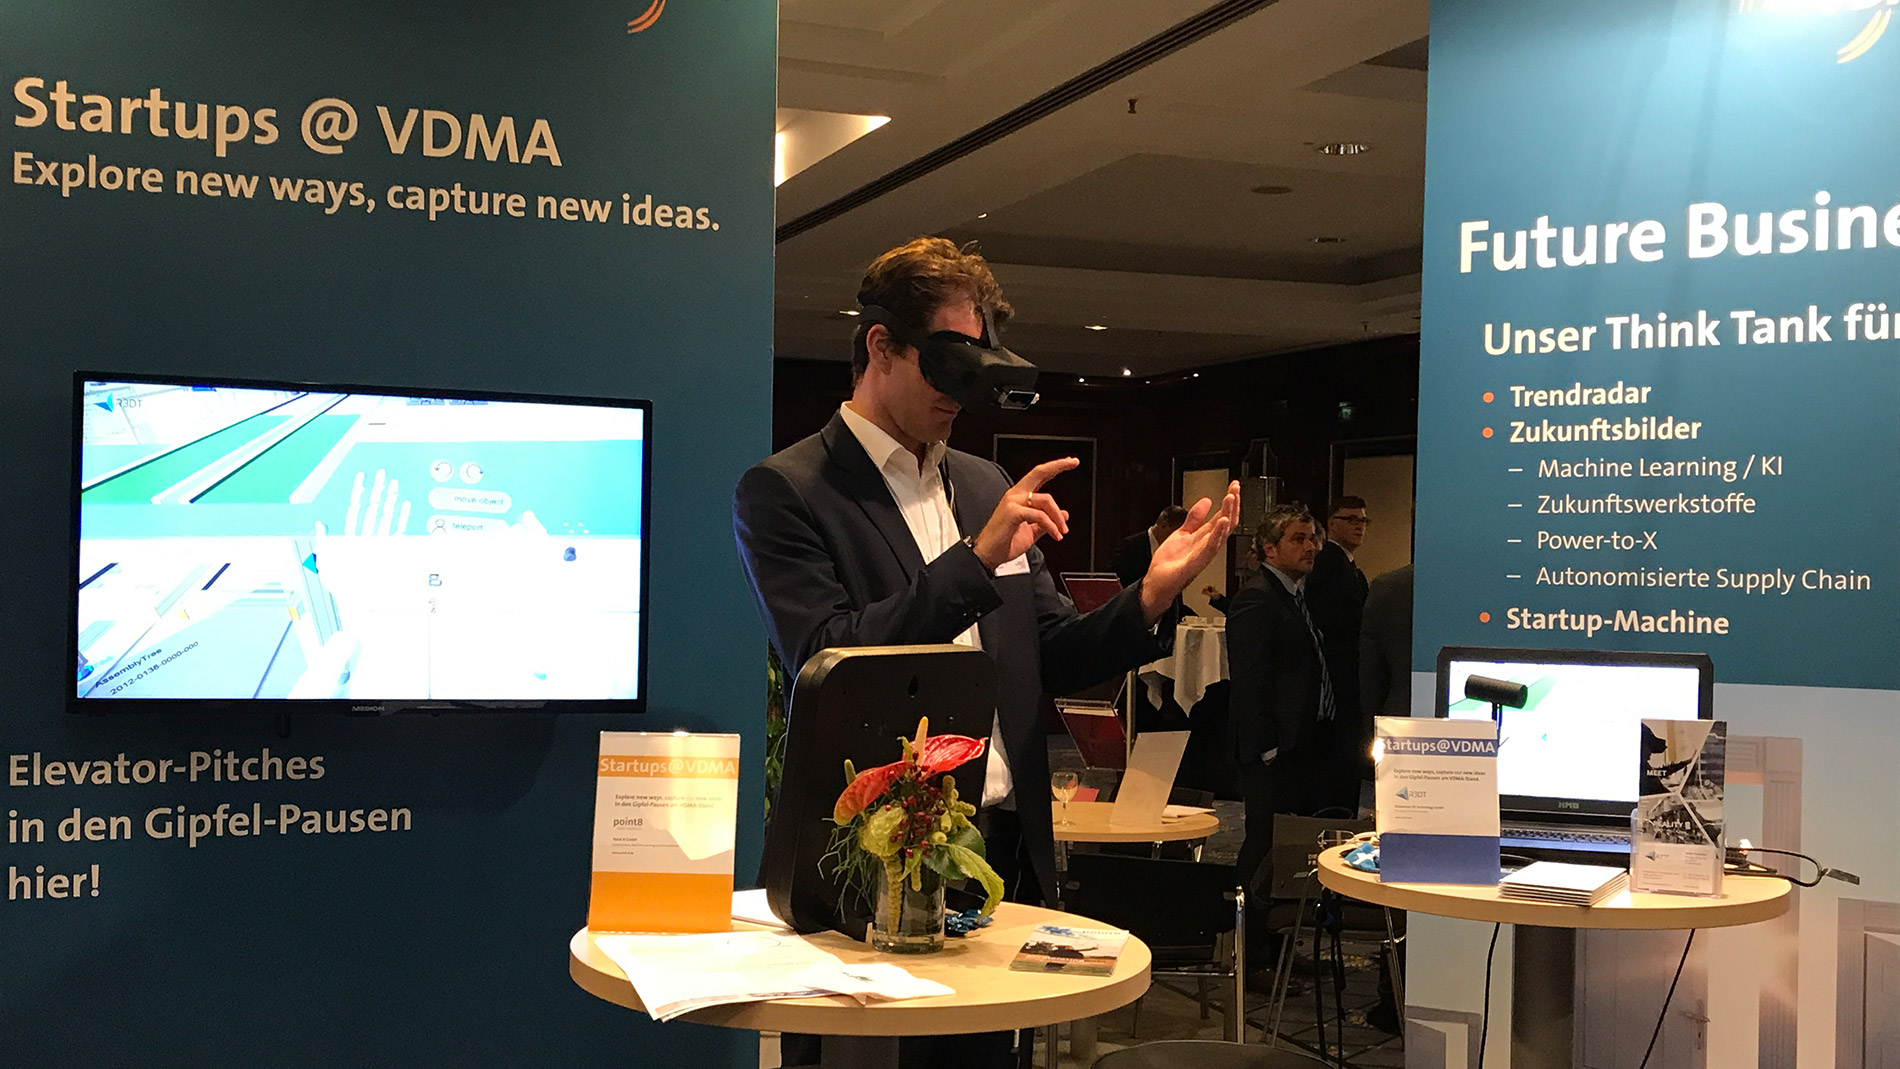 Who can work together? – The VDMA Startup Machine creates connections,... (image: VDMA)